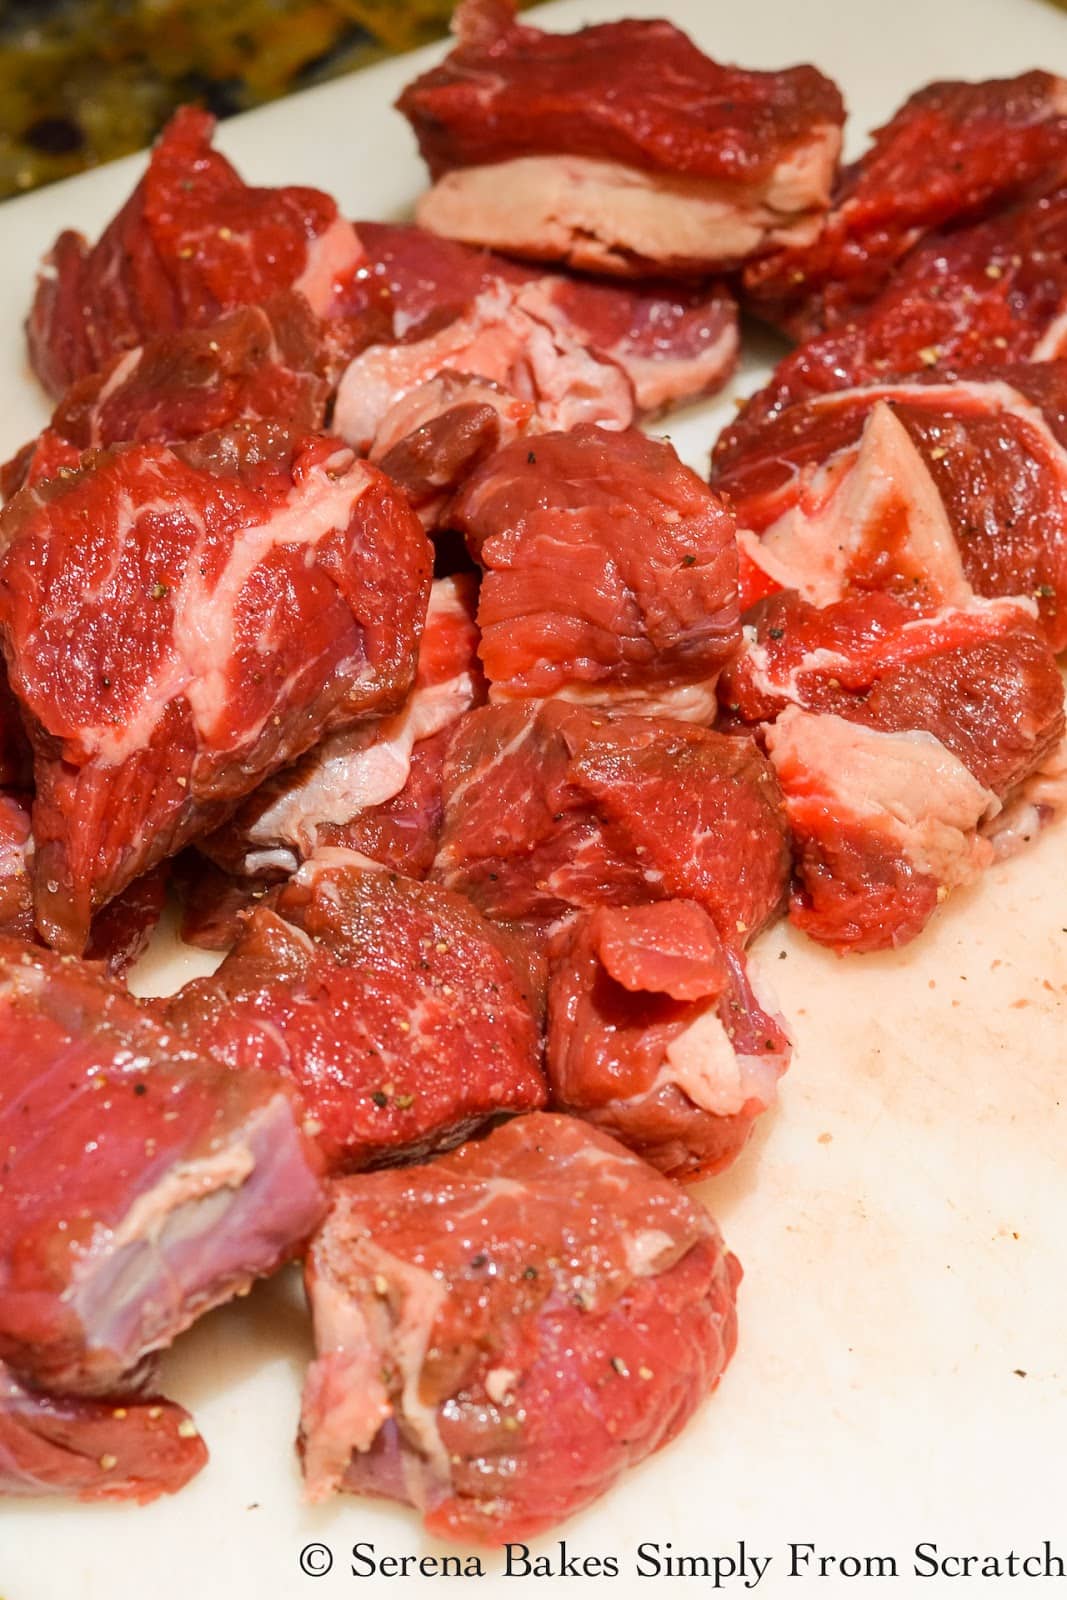 3 pounds Beef Chuck Roast cut into 1" pieces for Guinness Beef Stew recipe from scratch.